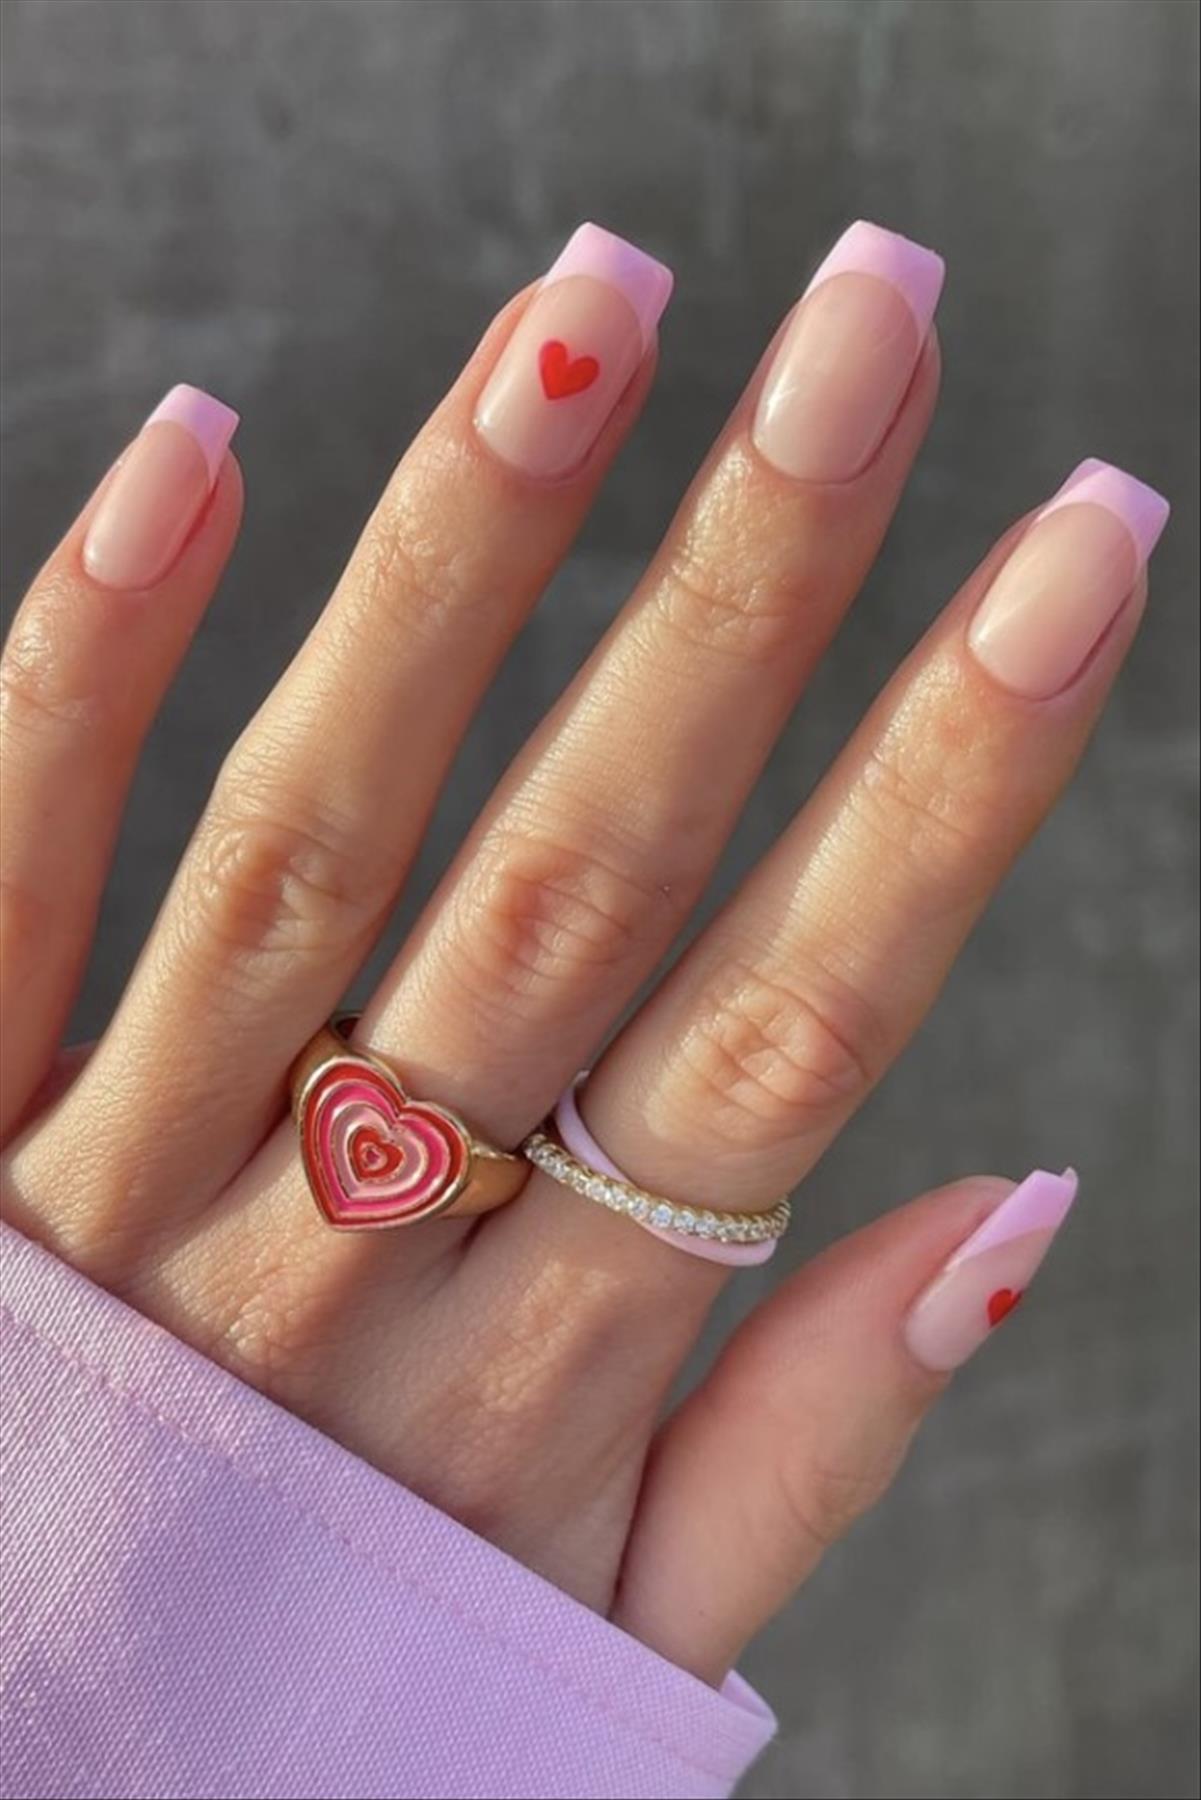 Romantic Valentine's Day nails for 14th February nails 2022